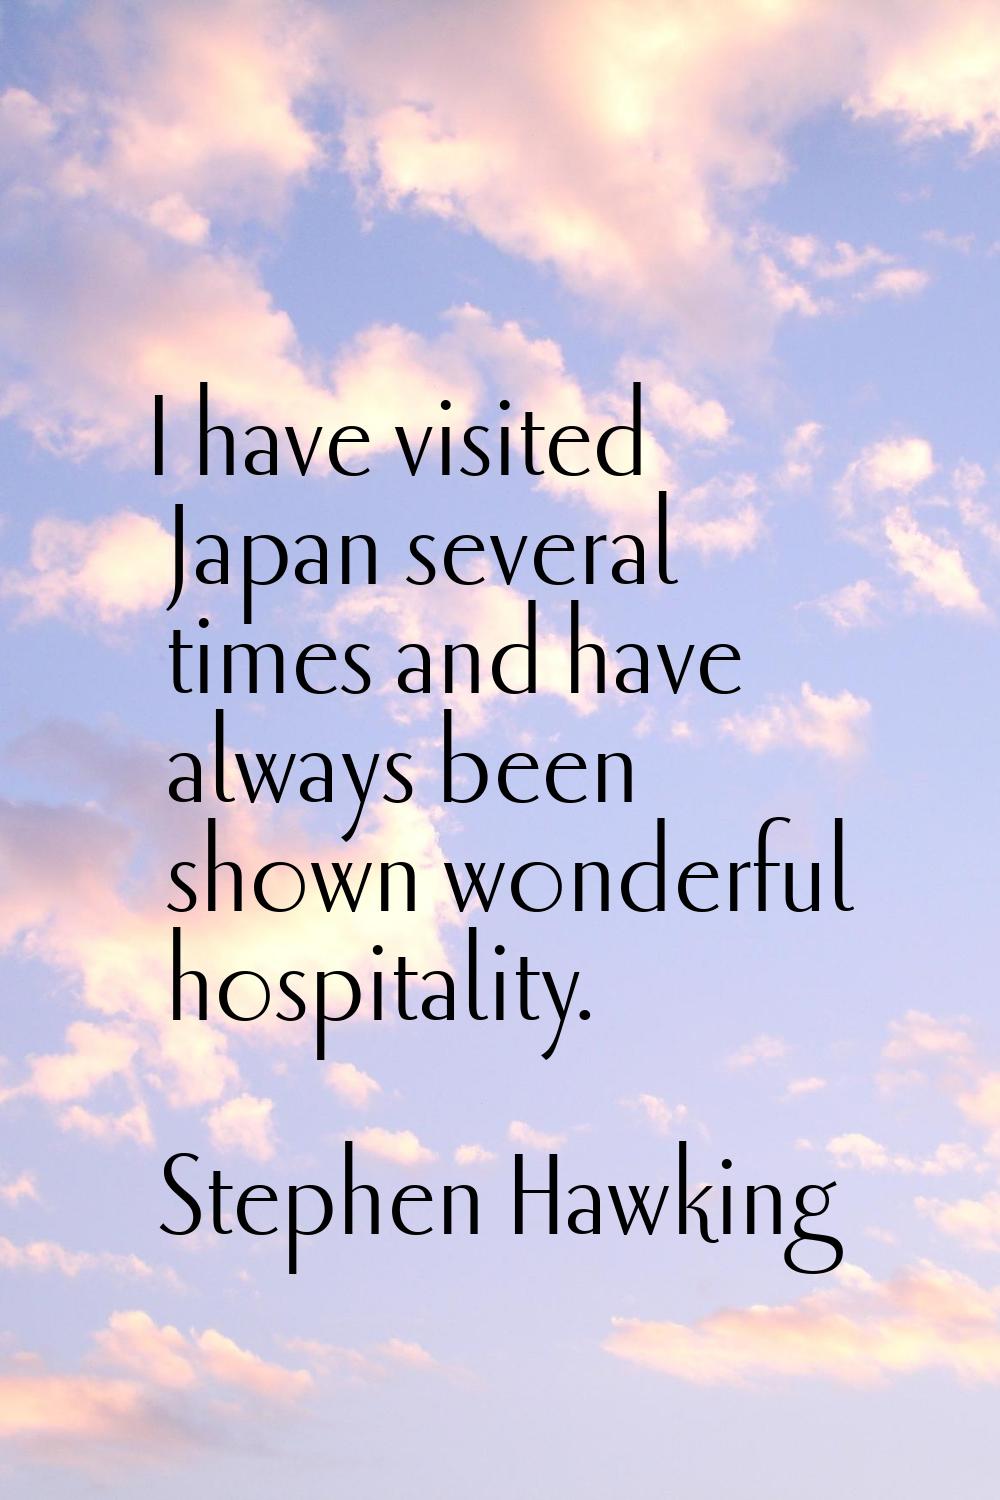 I have visited Japan several times and have always been shown wonderful hospitality.